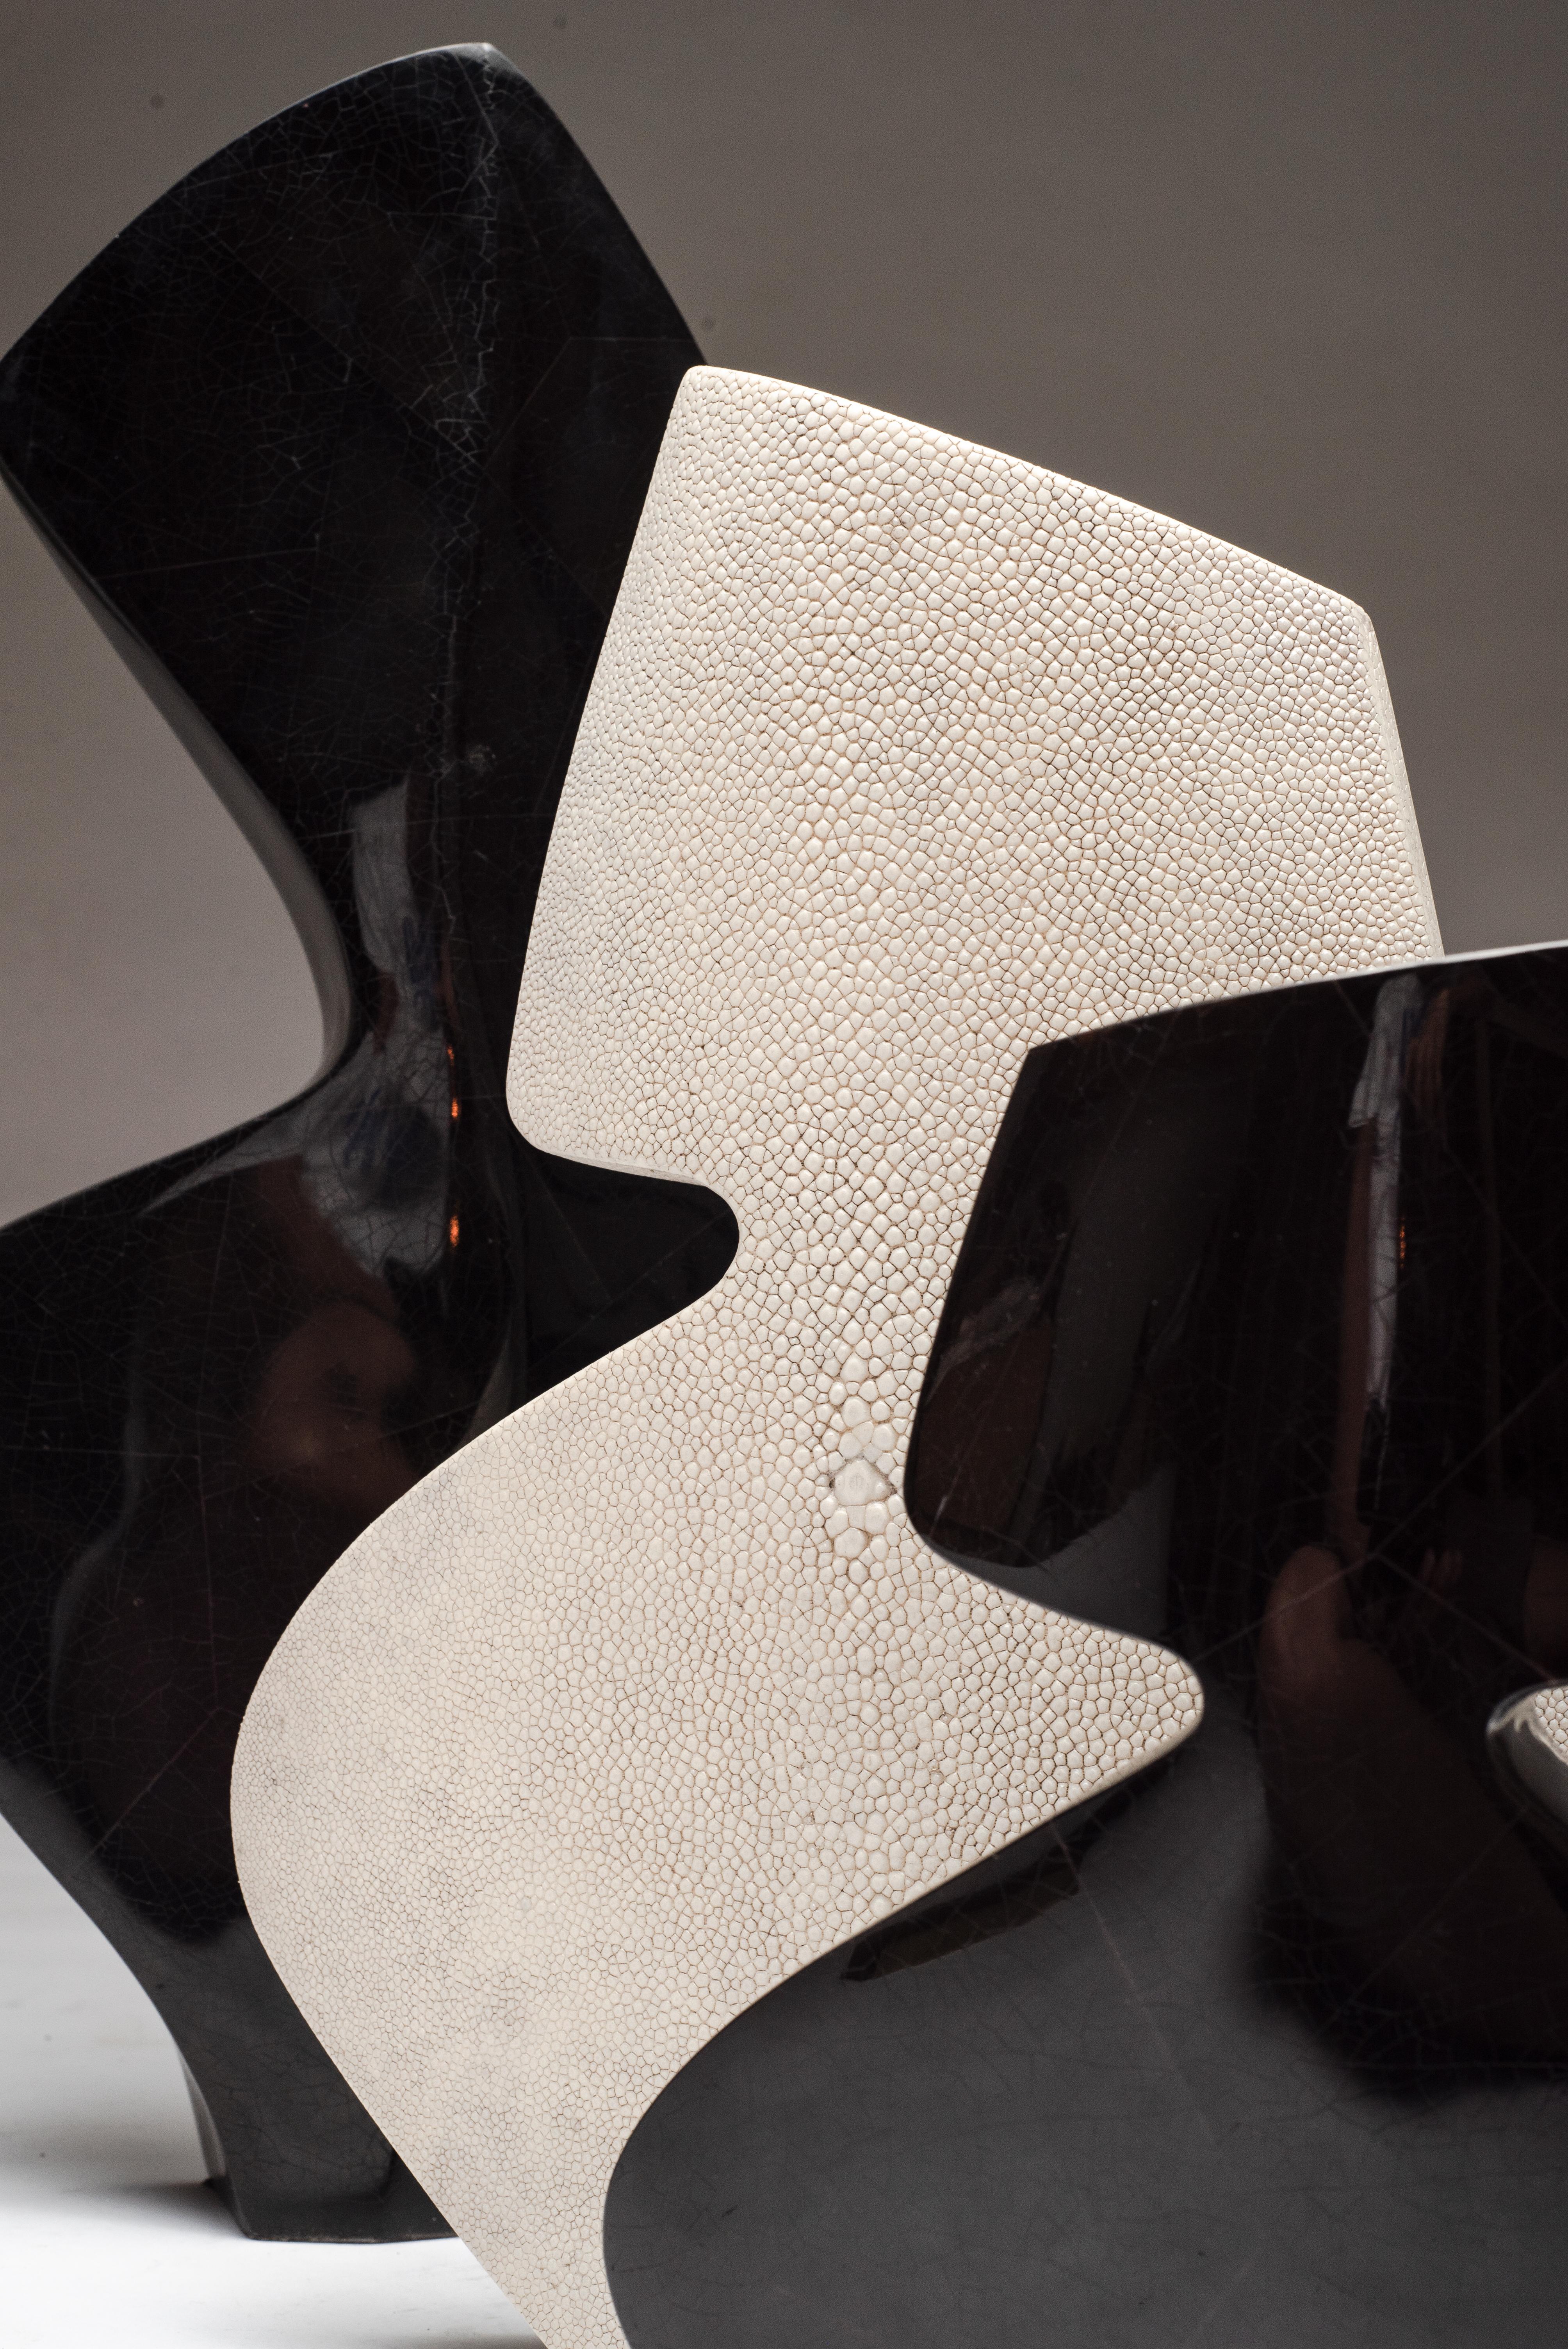 La Dame & La Femme vases by R&Y Augousti are beautiful sculptural pieces that are both feminine & bold, inlaid completely in black pen shell, cream shagreen and black pen shell respectively to create a dramatic statement. Available to be purchased